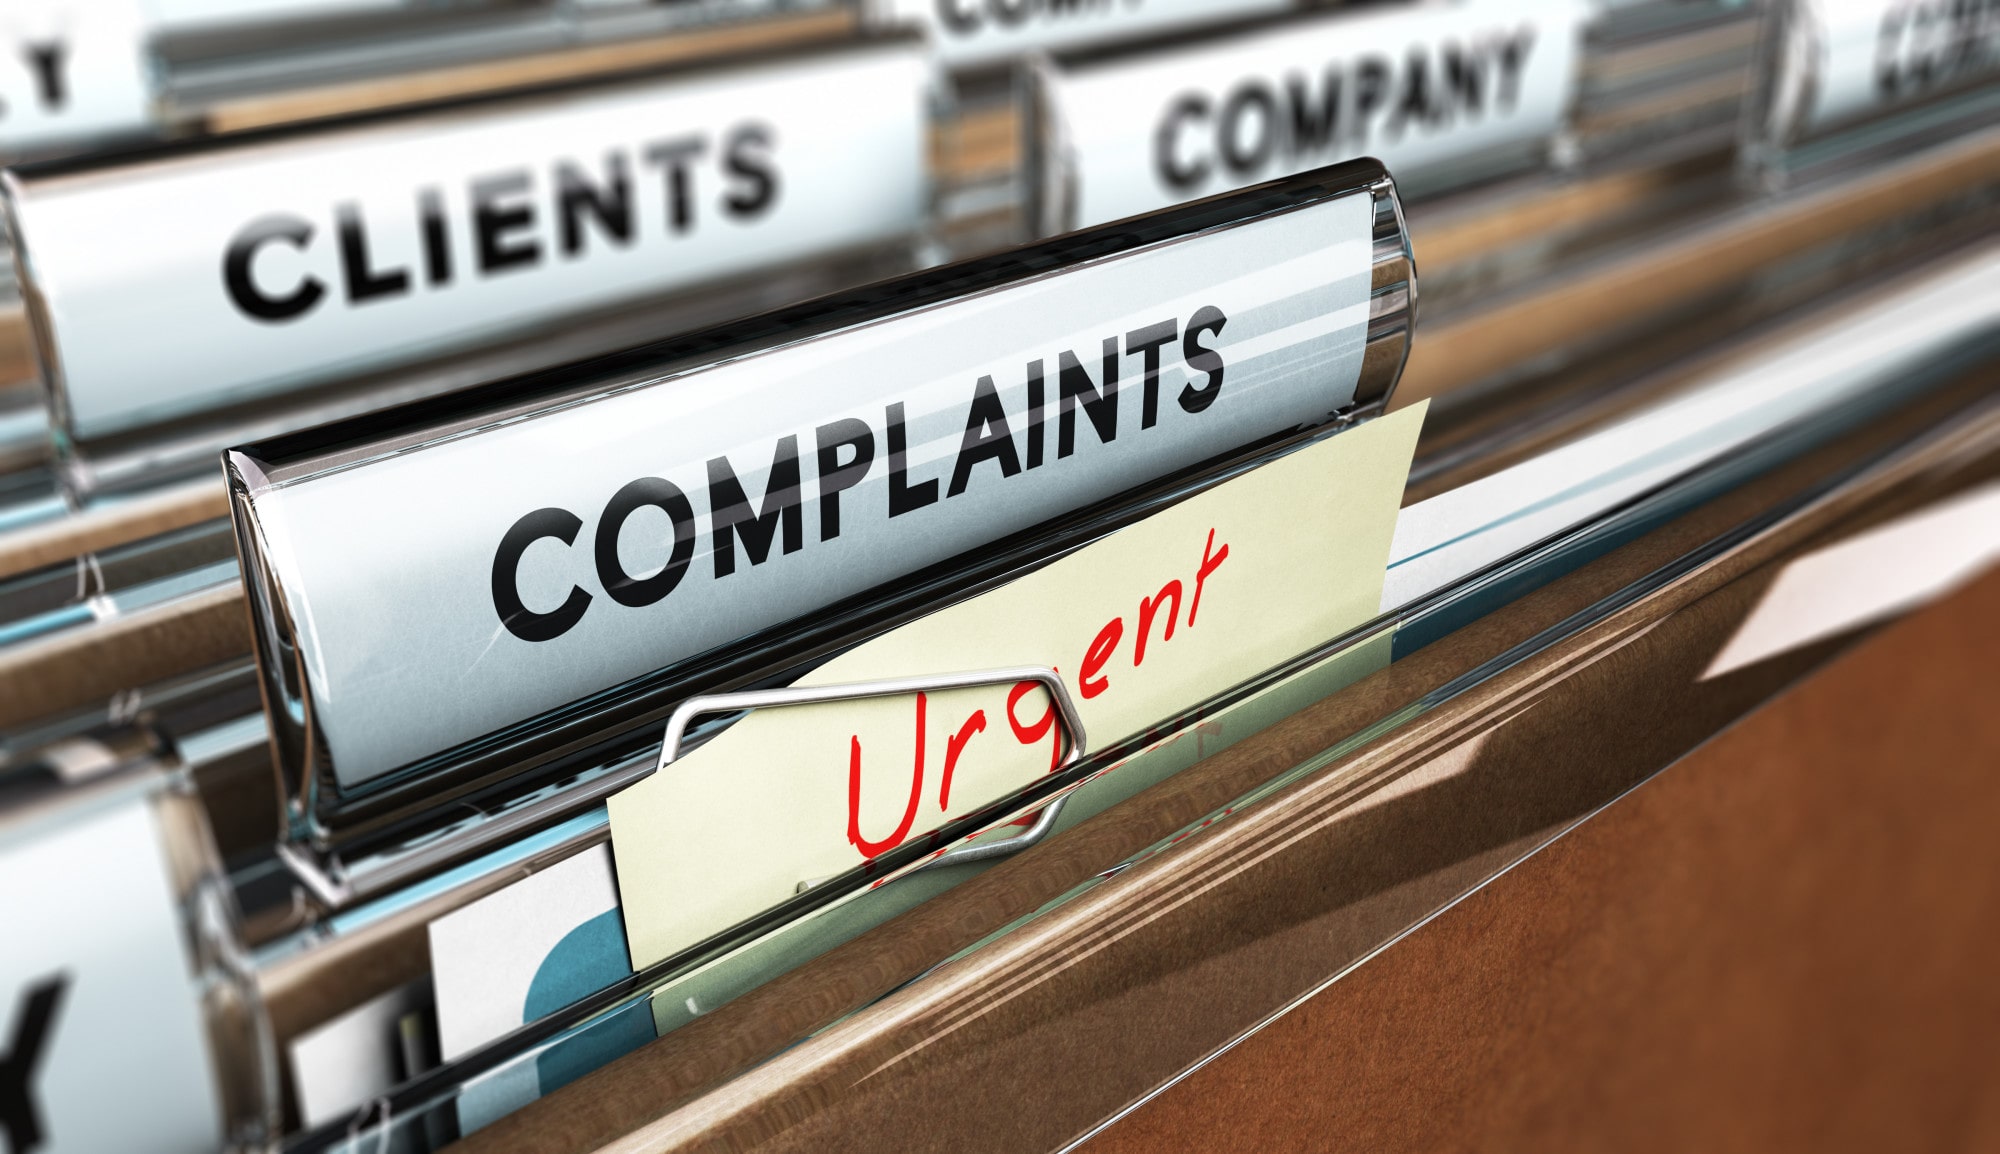 5 Common Tenant Complaints and How to Handle Them